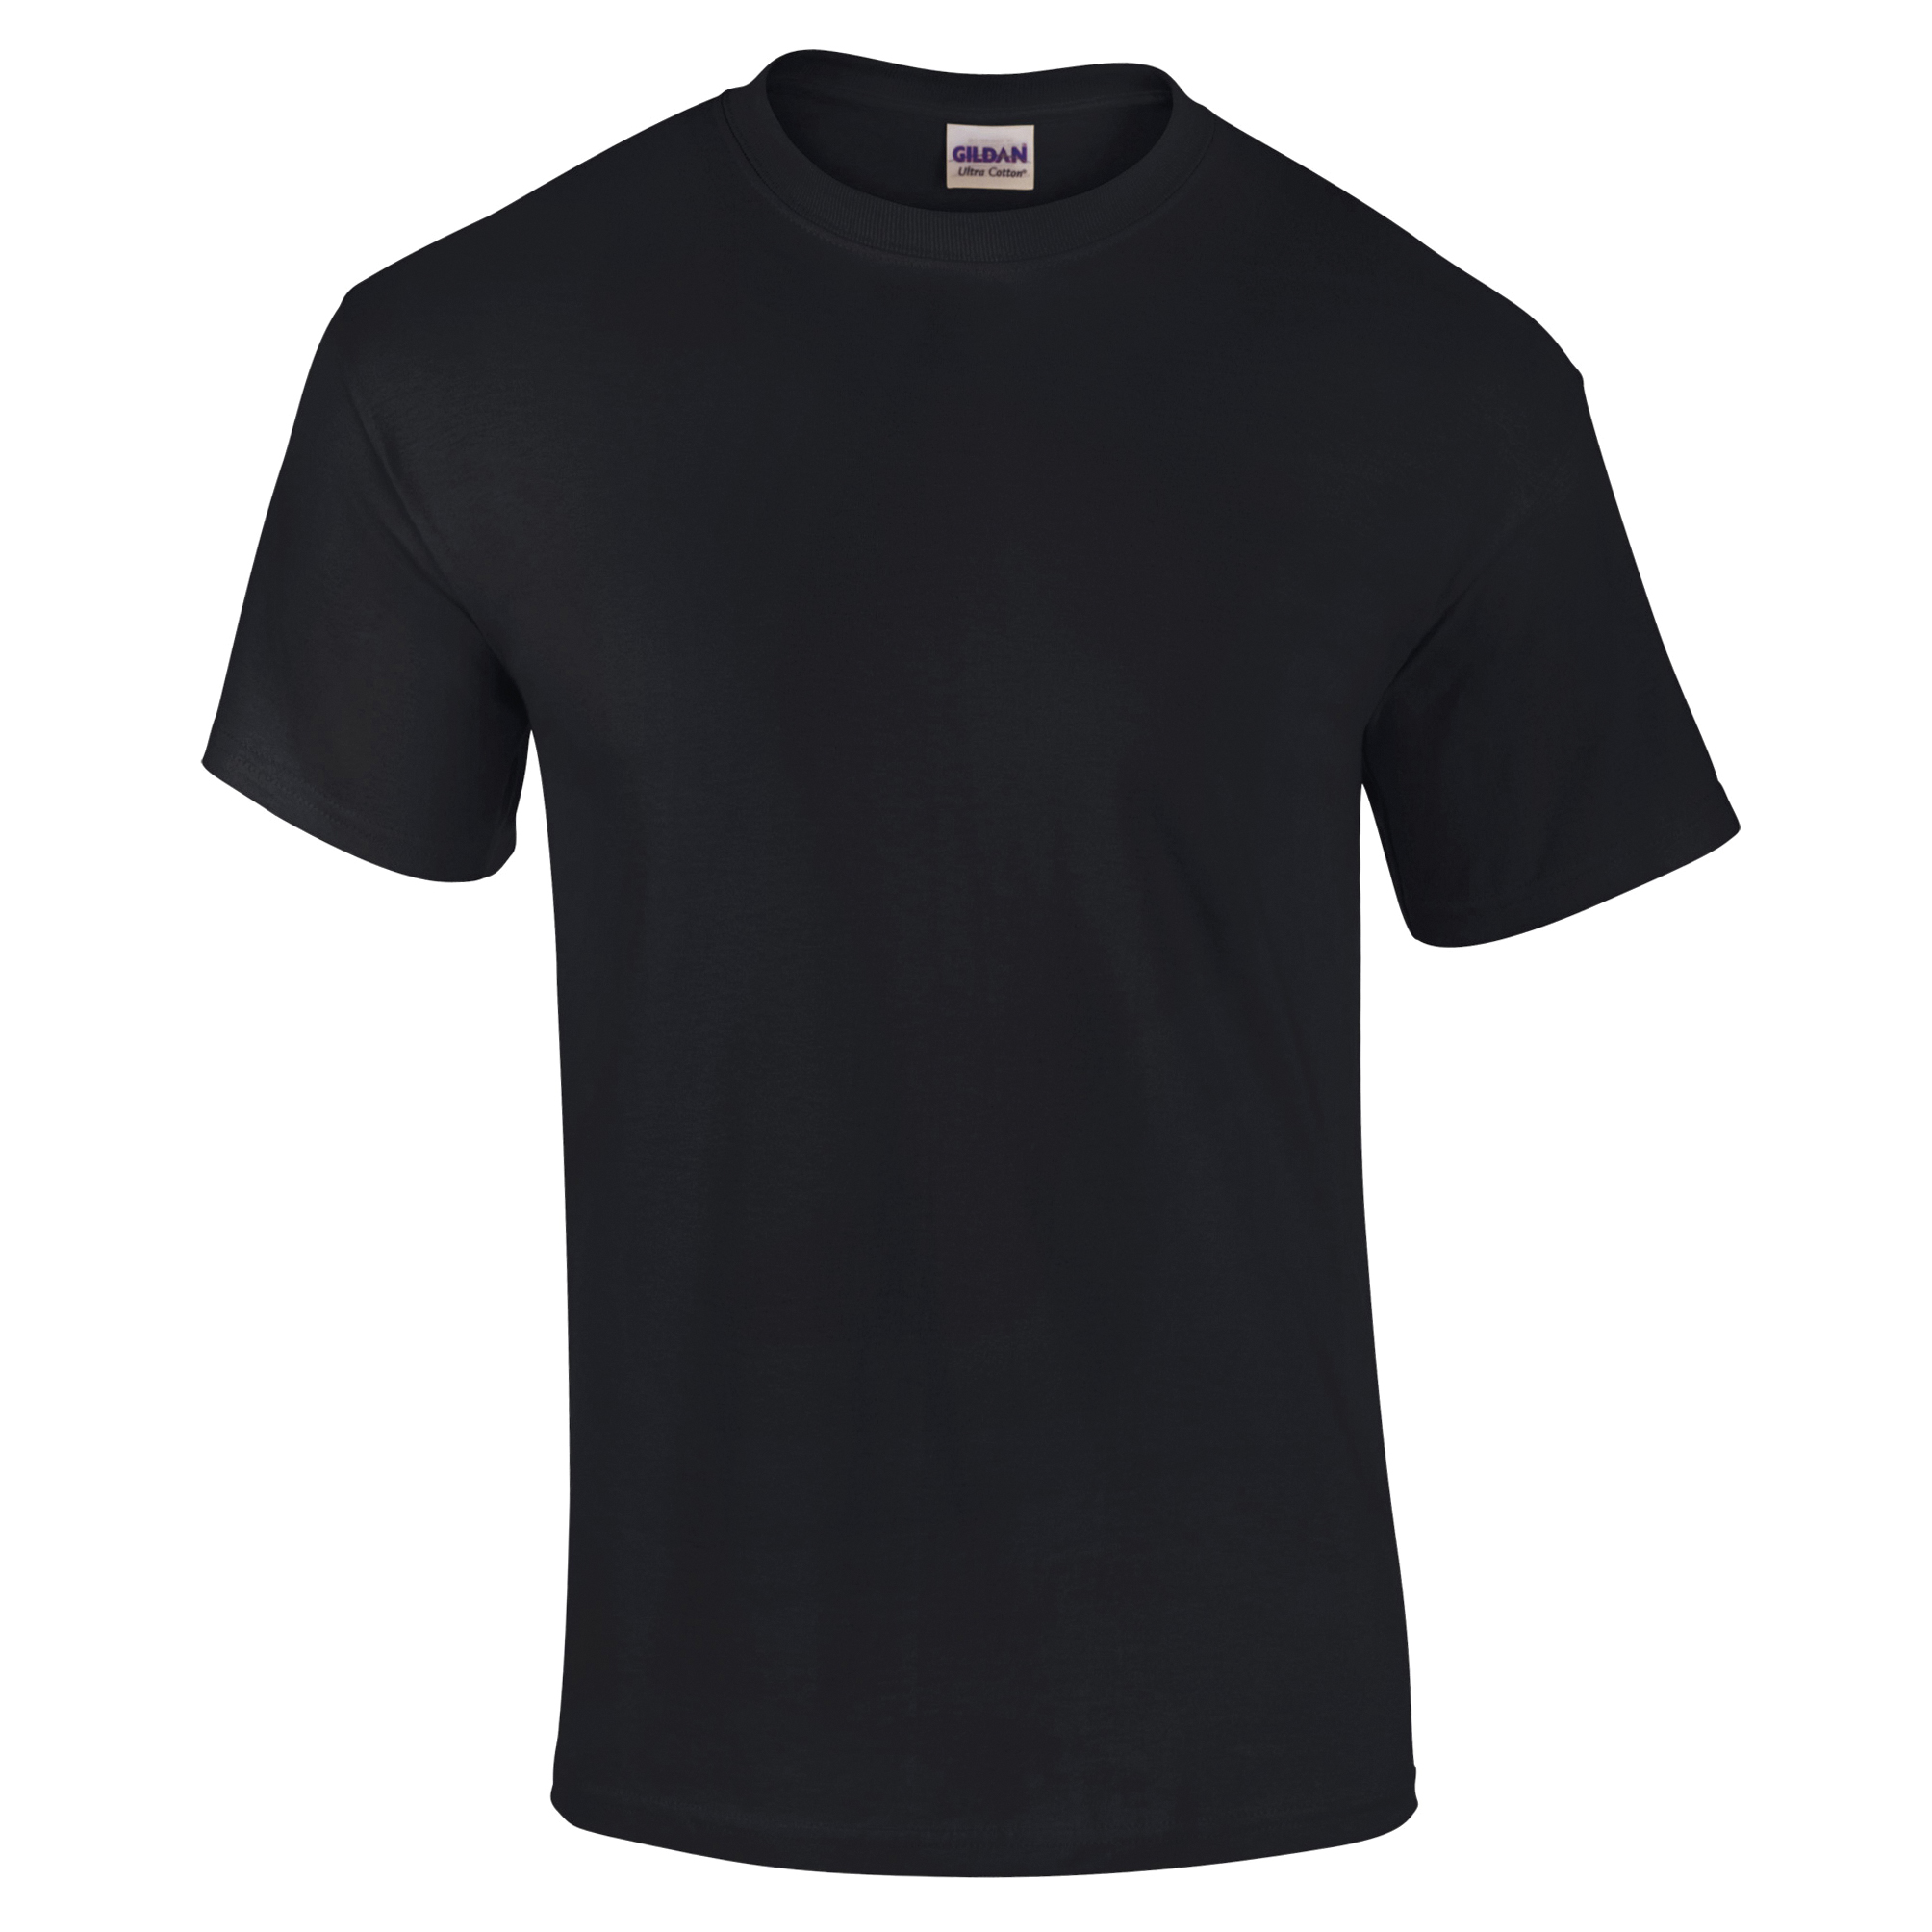 ax-httpswebsystems.s3.amazonaws.comtmp_for_downloadultra-cotton-black.jpg